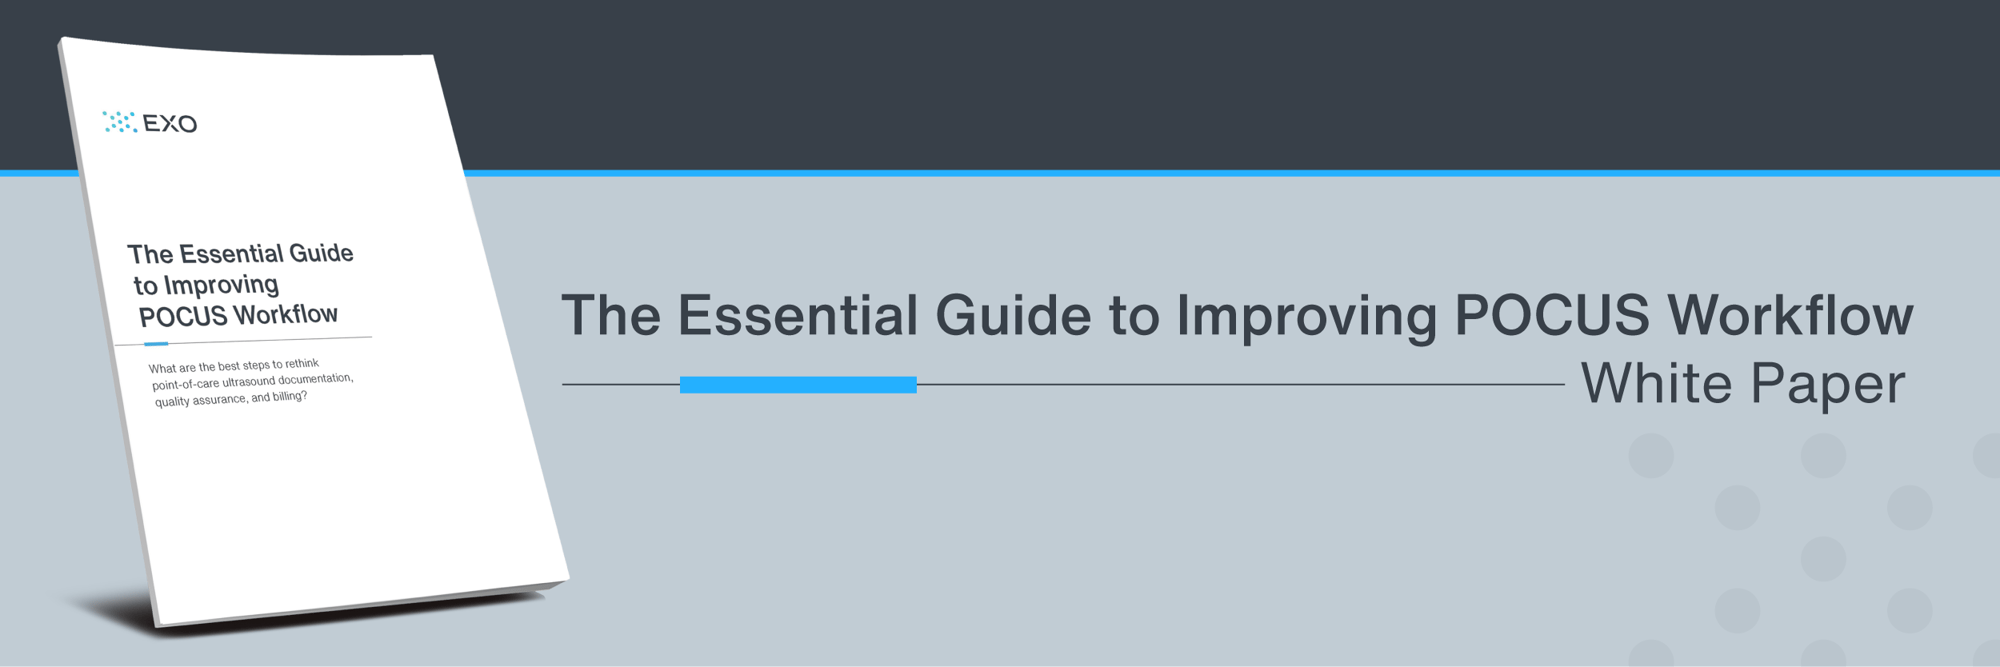 The Essential Guide to Improving POCUS Workflow | Exo White Paper | Email Hero 600x200